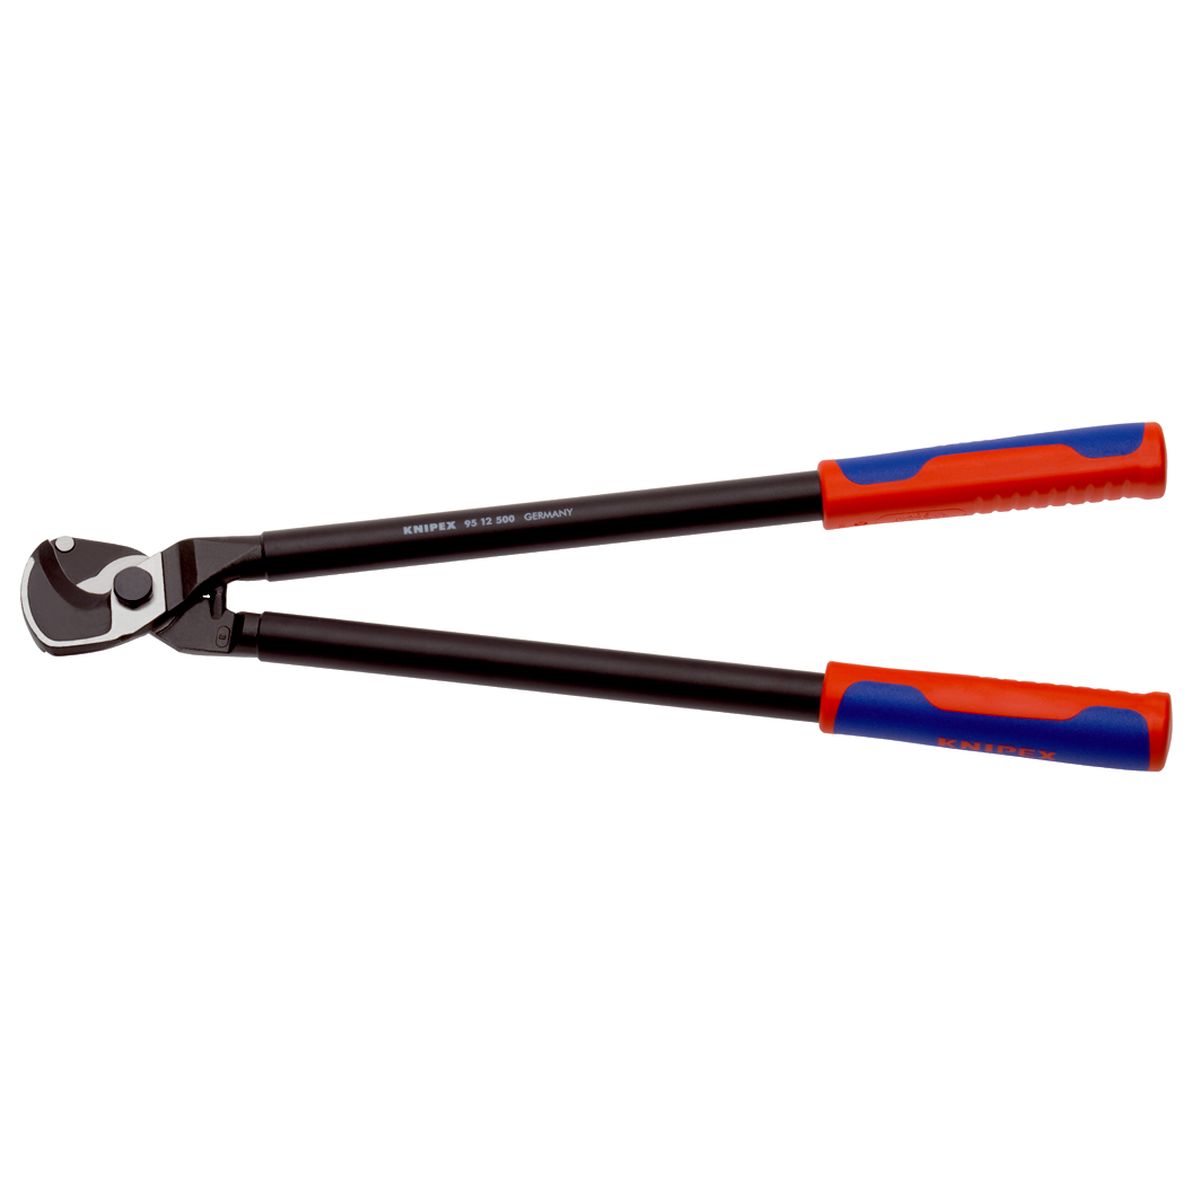 CABLE SHEARS 9512500 Knipex